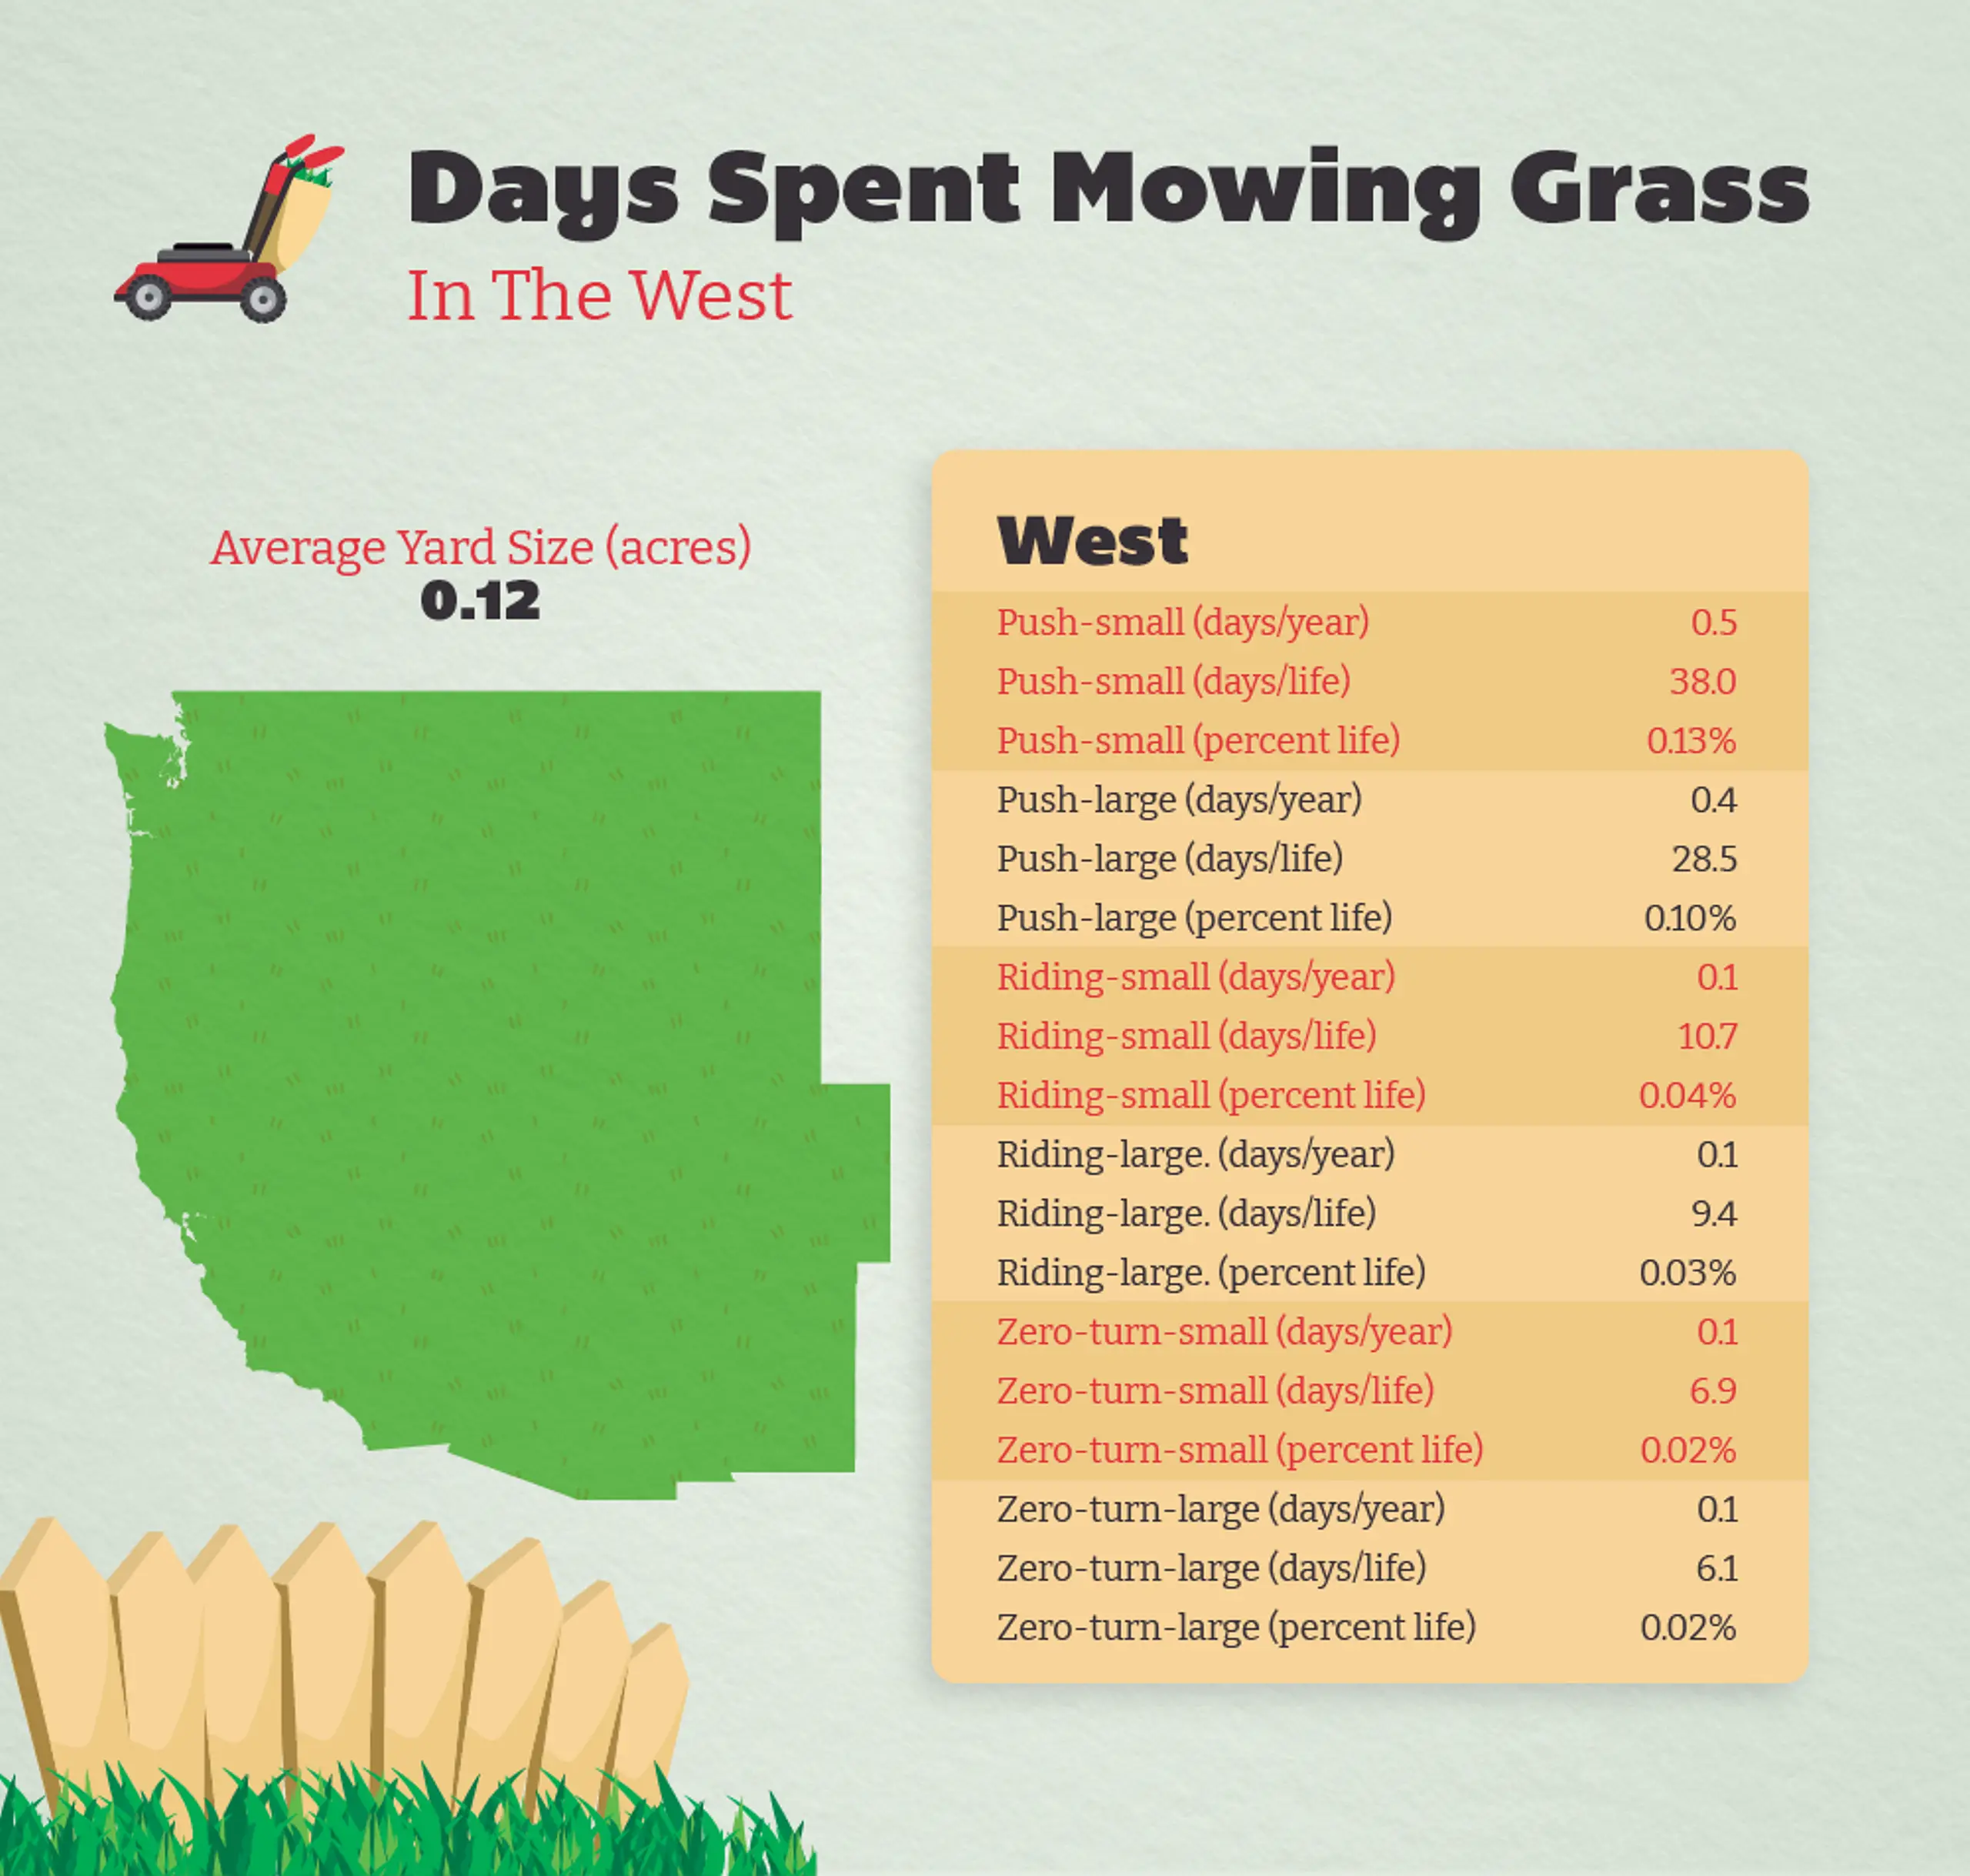 Days Spent Mowing the Lawn by U.S. Region